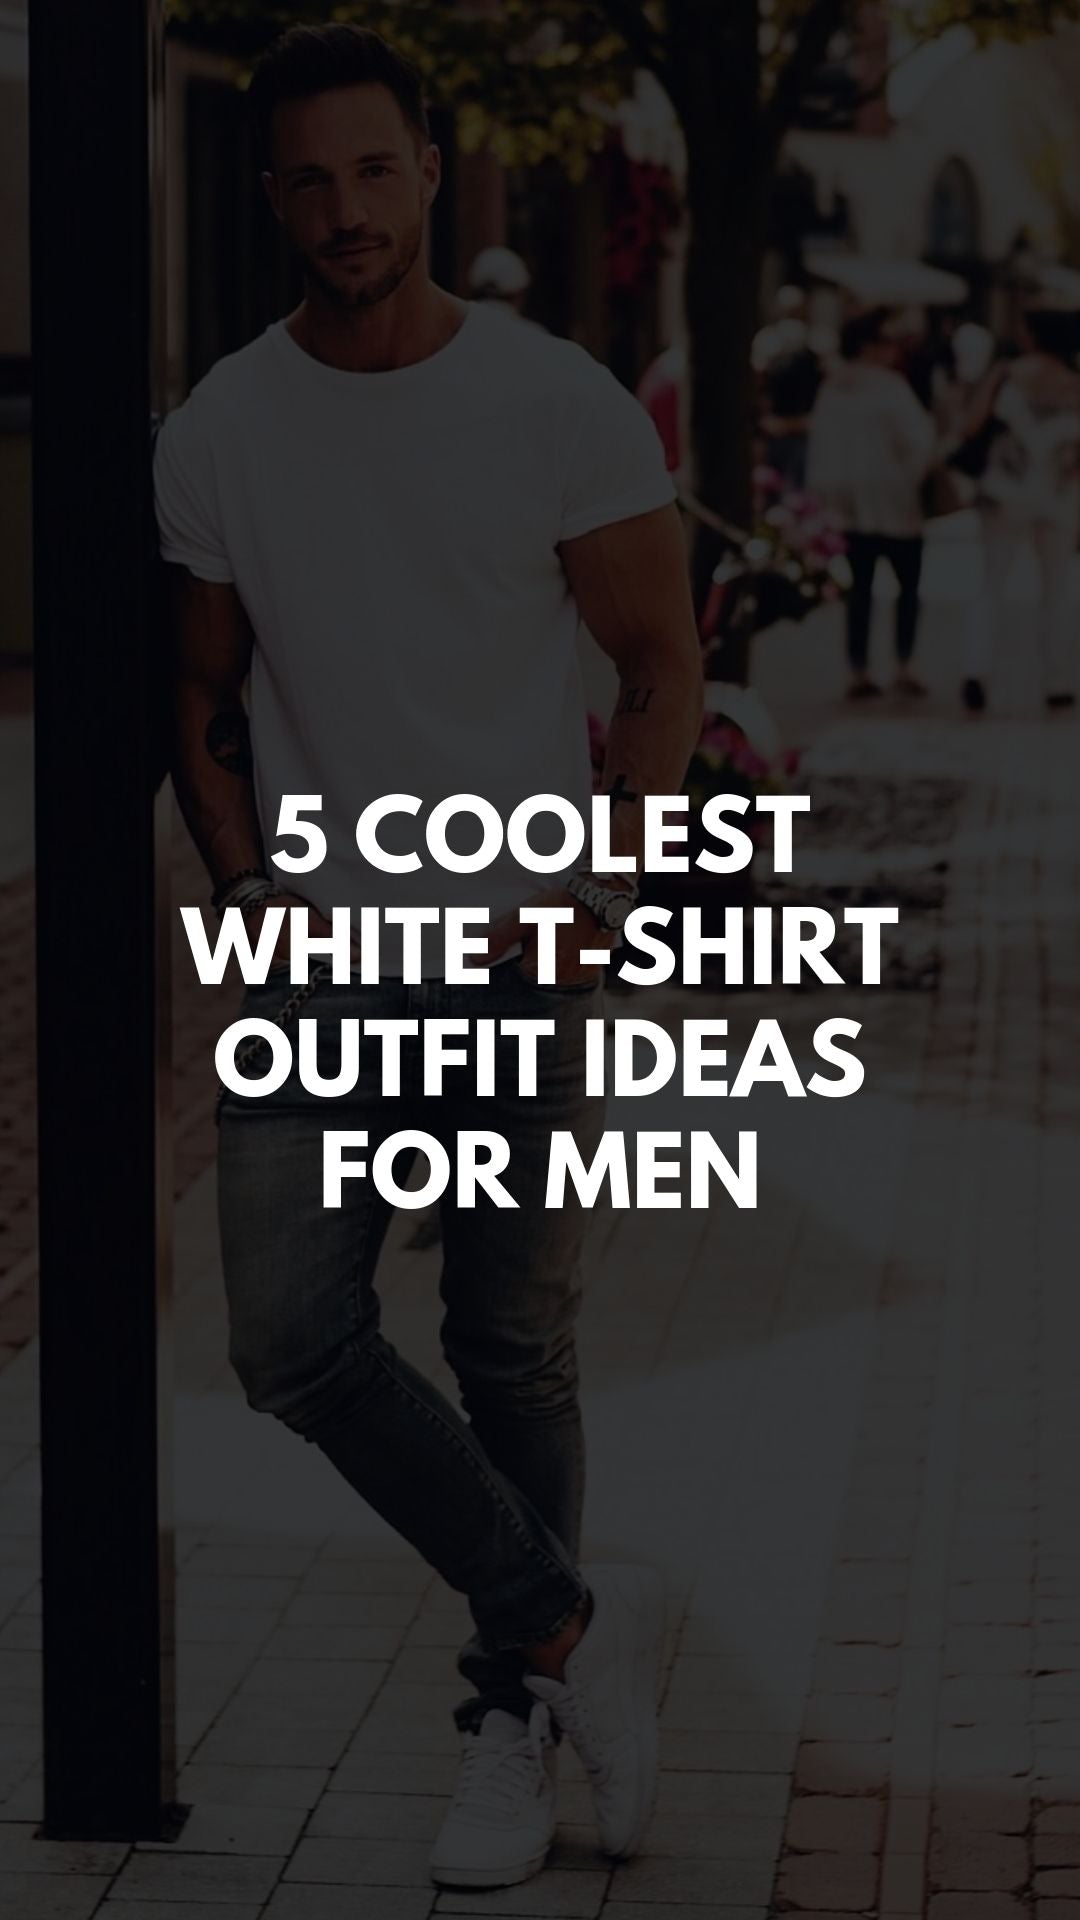 5 COOLEST WHITE T-SHIRT OUTFIT IDEAS FOR MEN